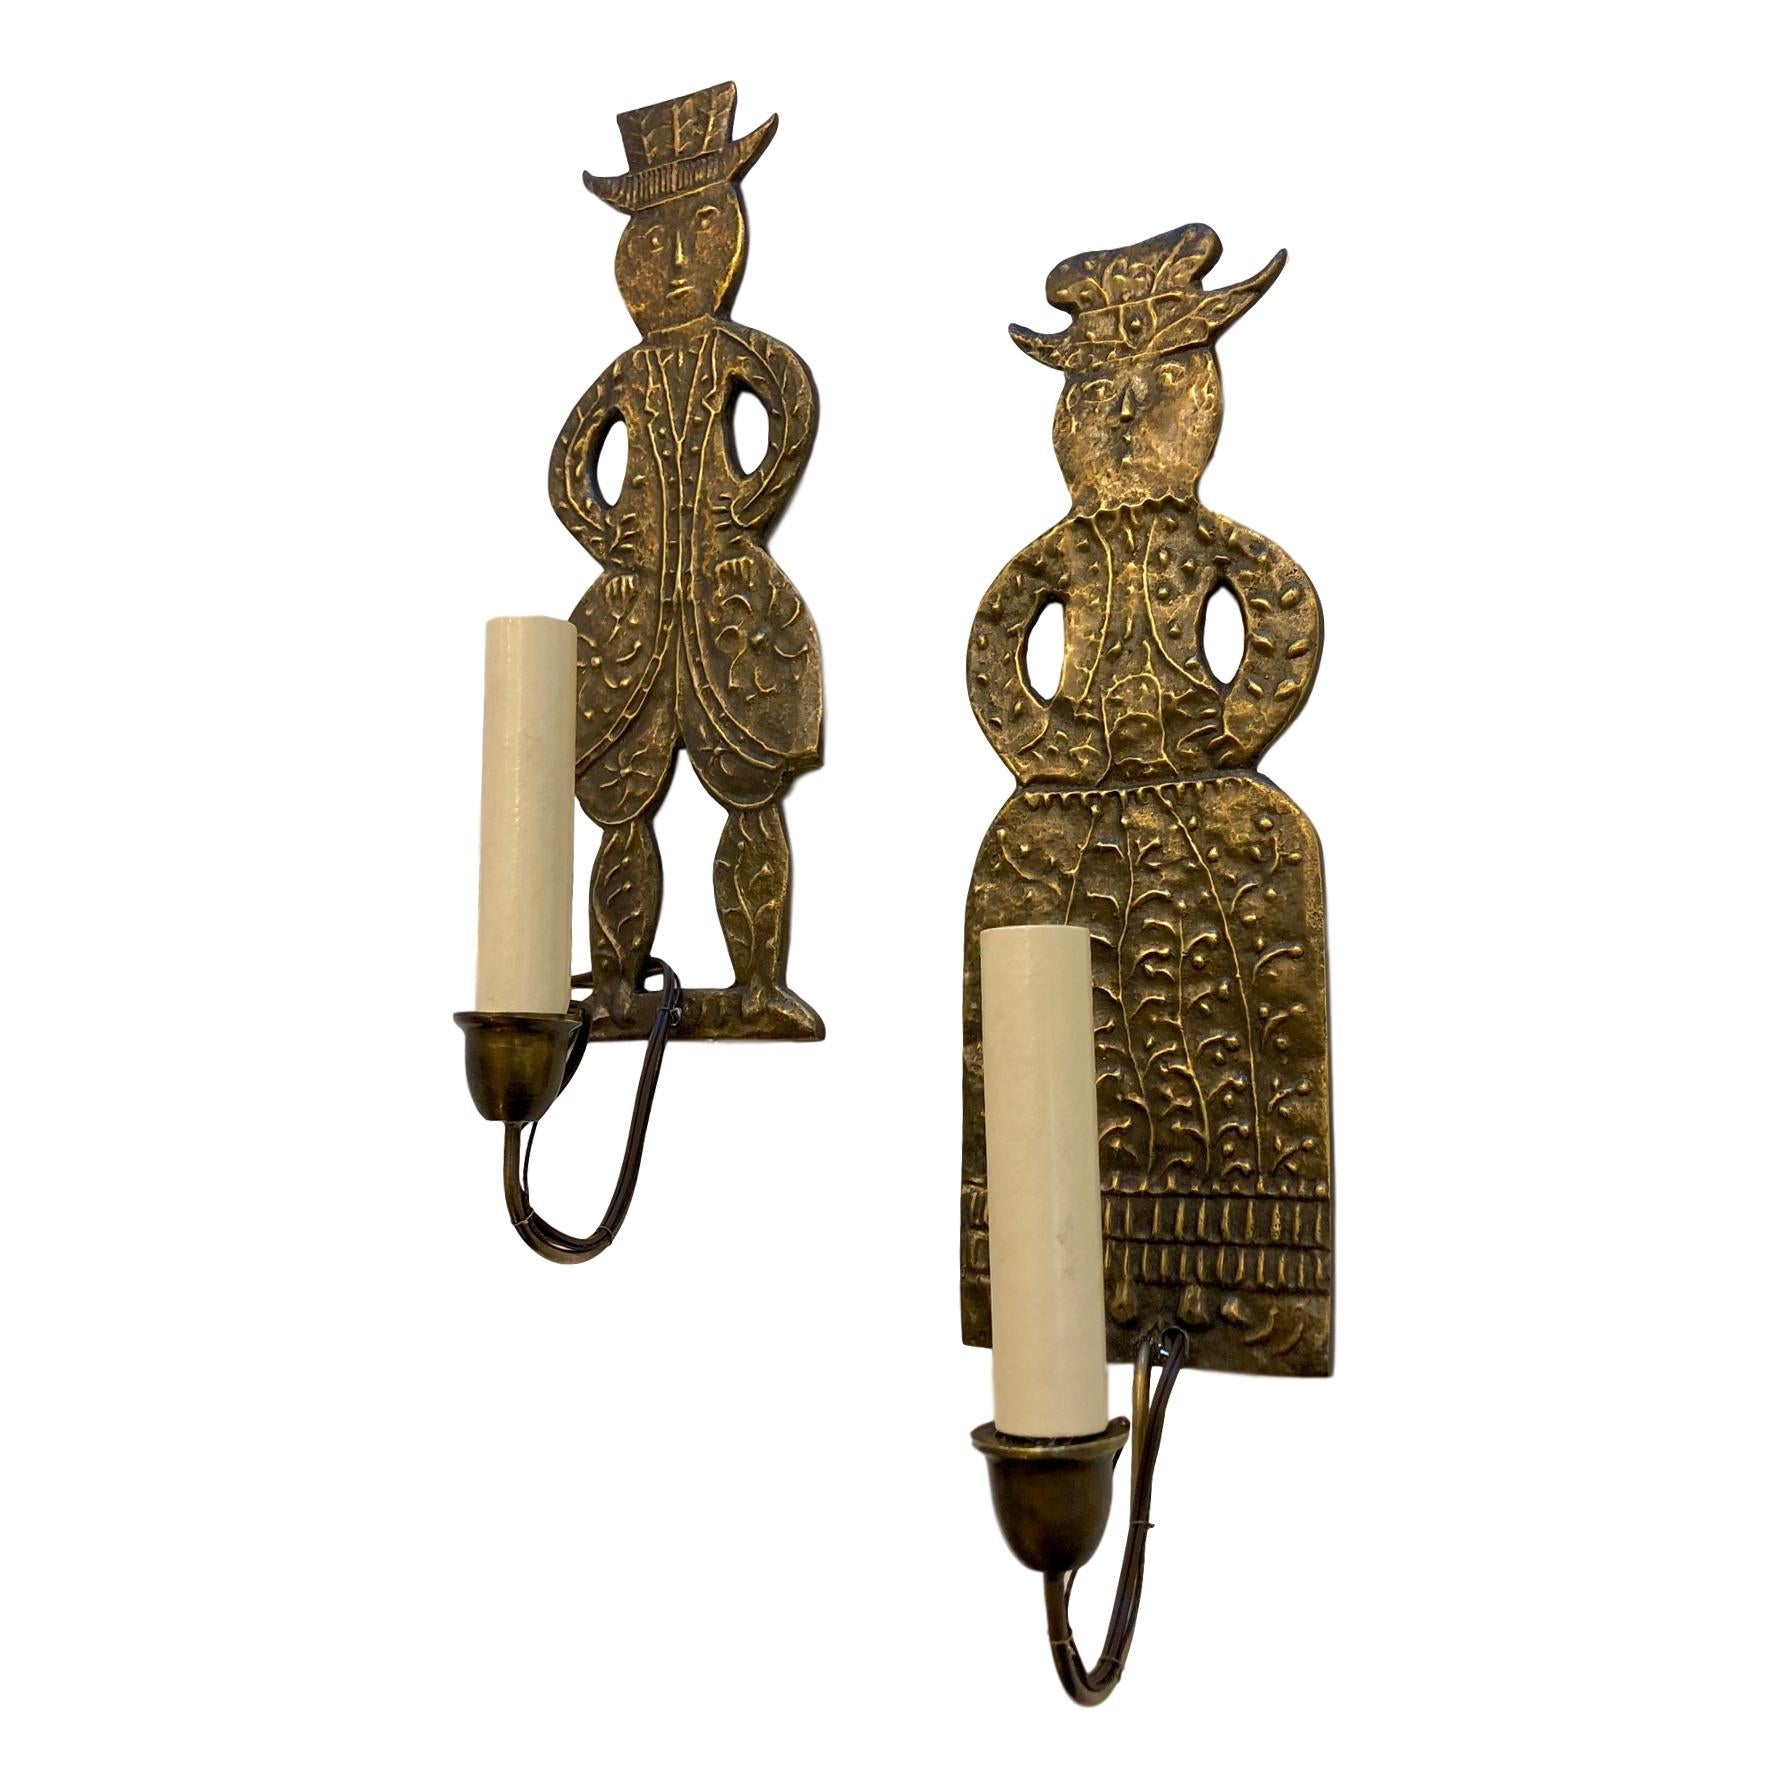 A pair of circa 1910 single-arm figurative Dutch sconces that have been electrified.

Measurements:
Height 14?
Width 4?
Depth 4?.